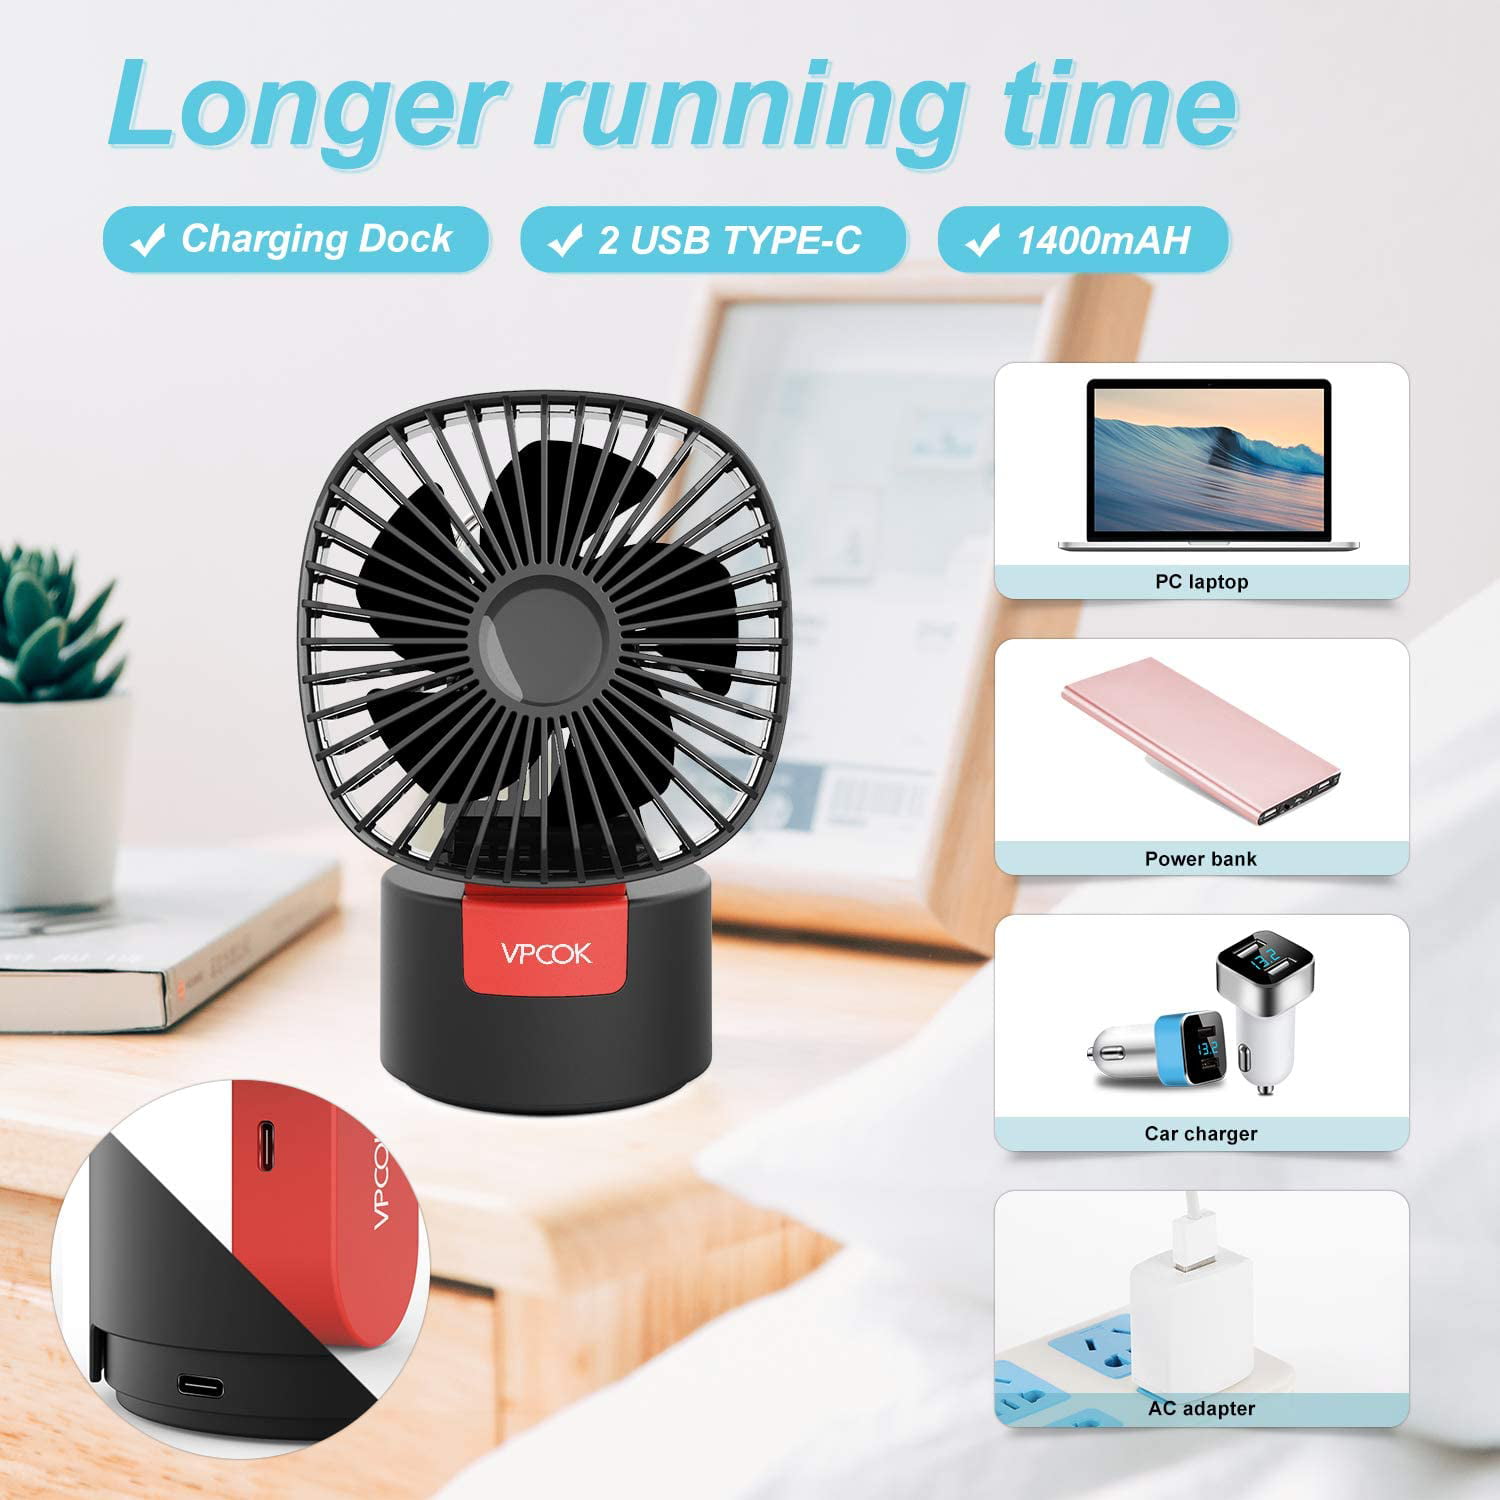 180° Foldable with 60° Rotatable Head Black Portable Fan for Travel Outdoor Office Home and Bedroom VPCOK USB Fan 2 in 1 Handheld Fan Mini Desk Fan 3 Speed 5 blades